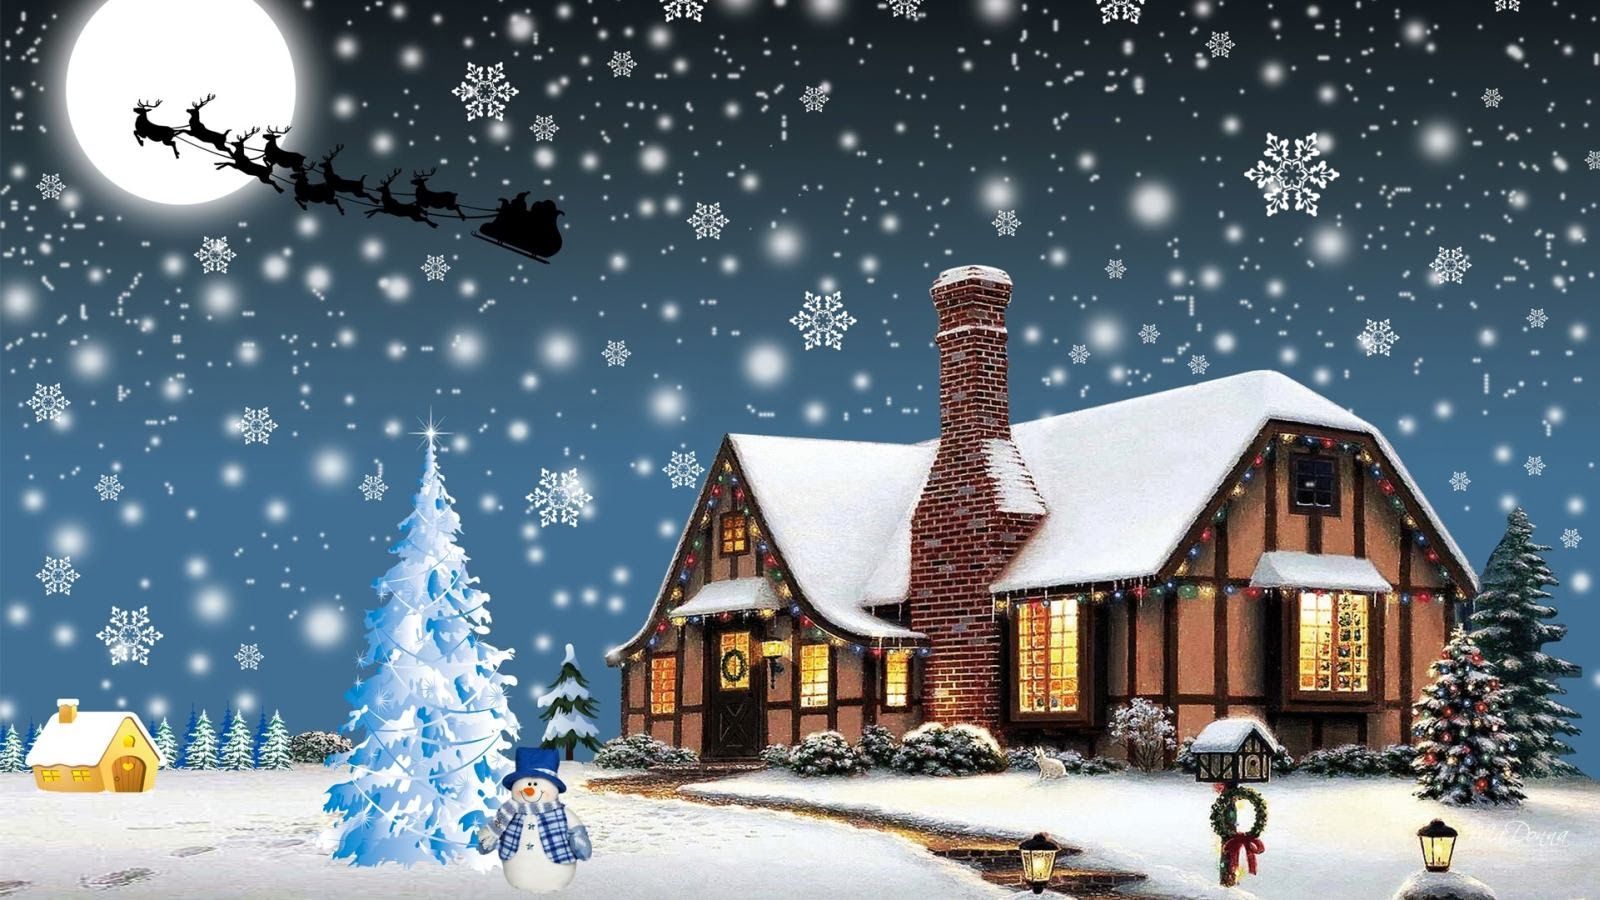 Beautiful Christmas Wallpaper for your Desktop. Most beautiful places in the world. Download Free Wallpaper